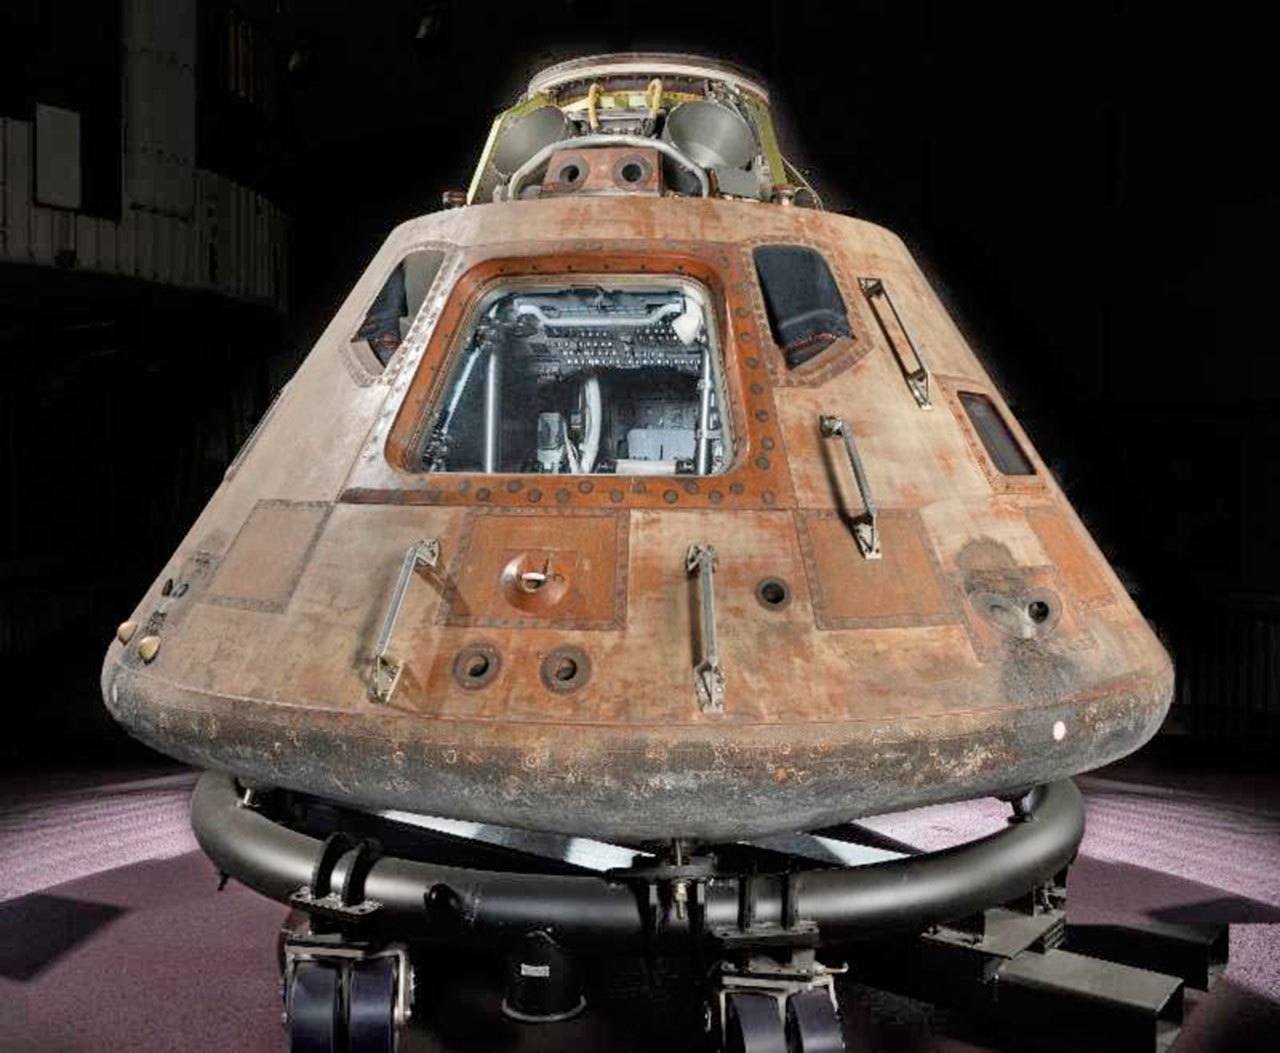 The Apollo 11 command module Columbia. COURTESY PHOTO, Smithsonian National Air and Space Museum.